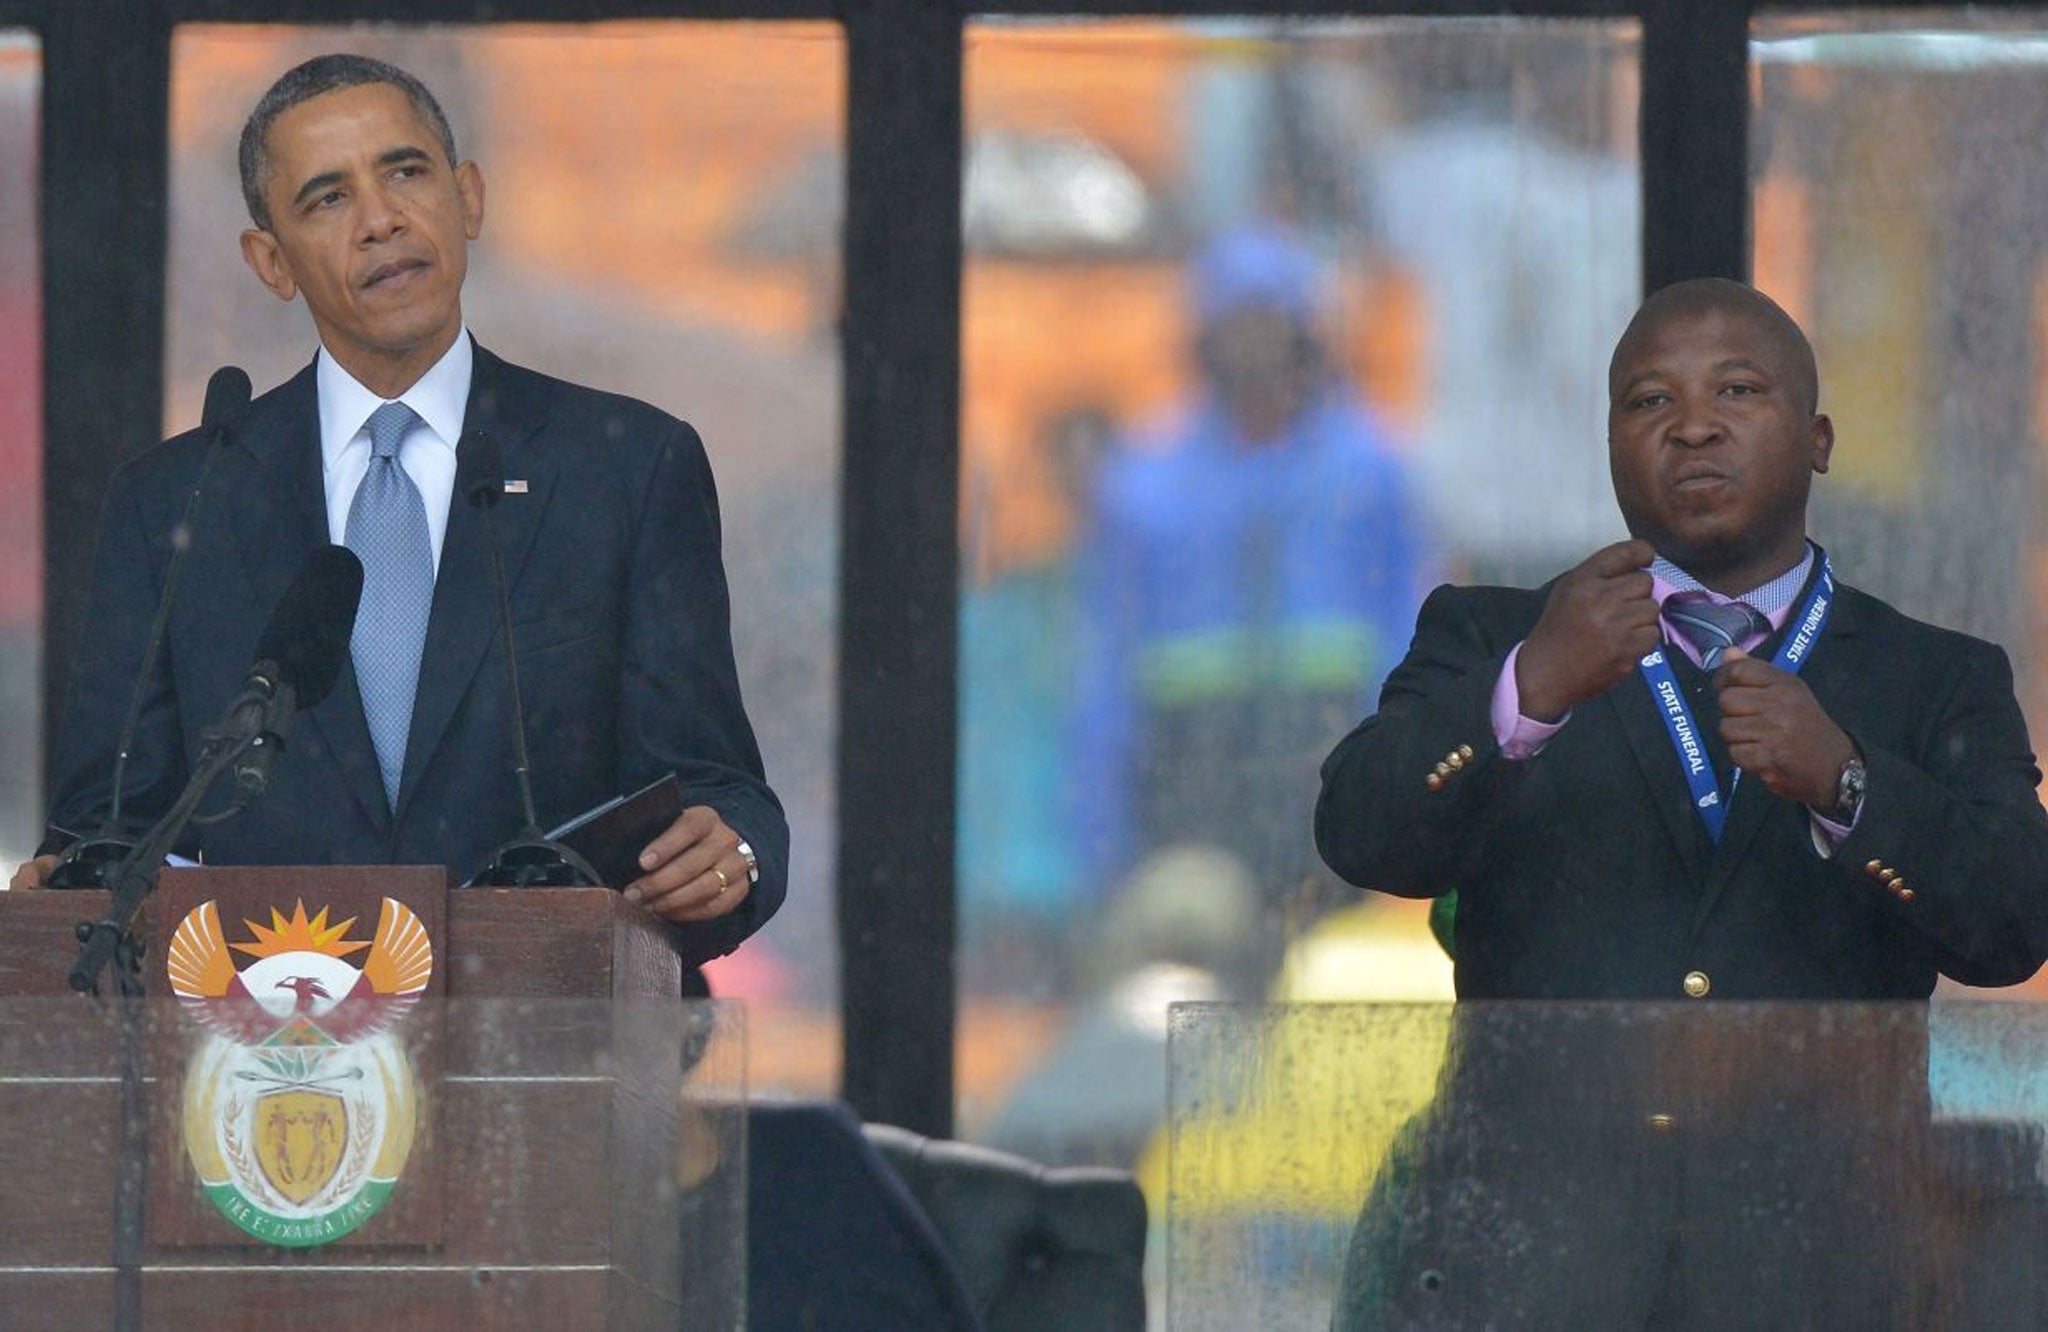 South Africa's deaf community accused the sign language interpreter at Nelson Mandela's memorial of being 'fake'